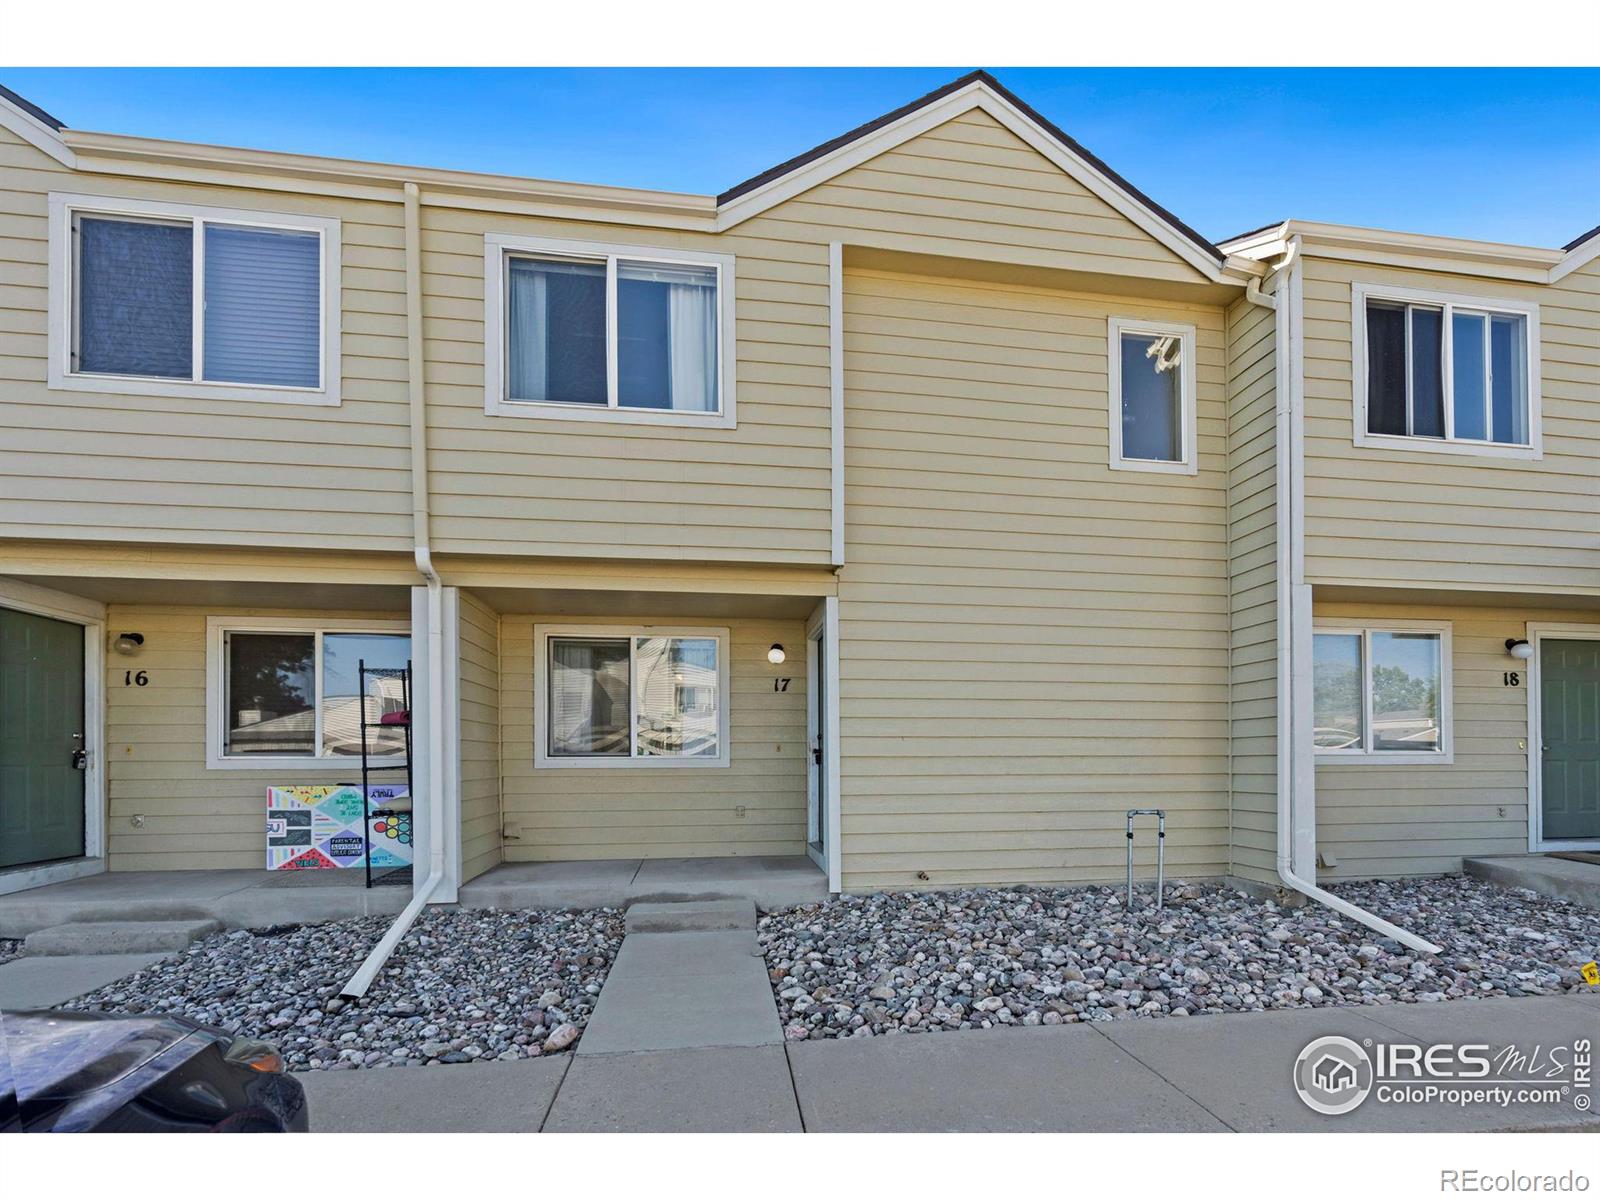 3005  Ross Drive, fort collins MLS: 123456789994305 Beds: 3 Baths: 3 Price: $314,000